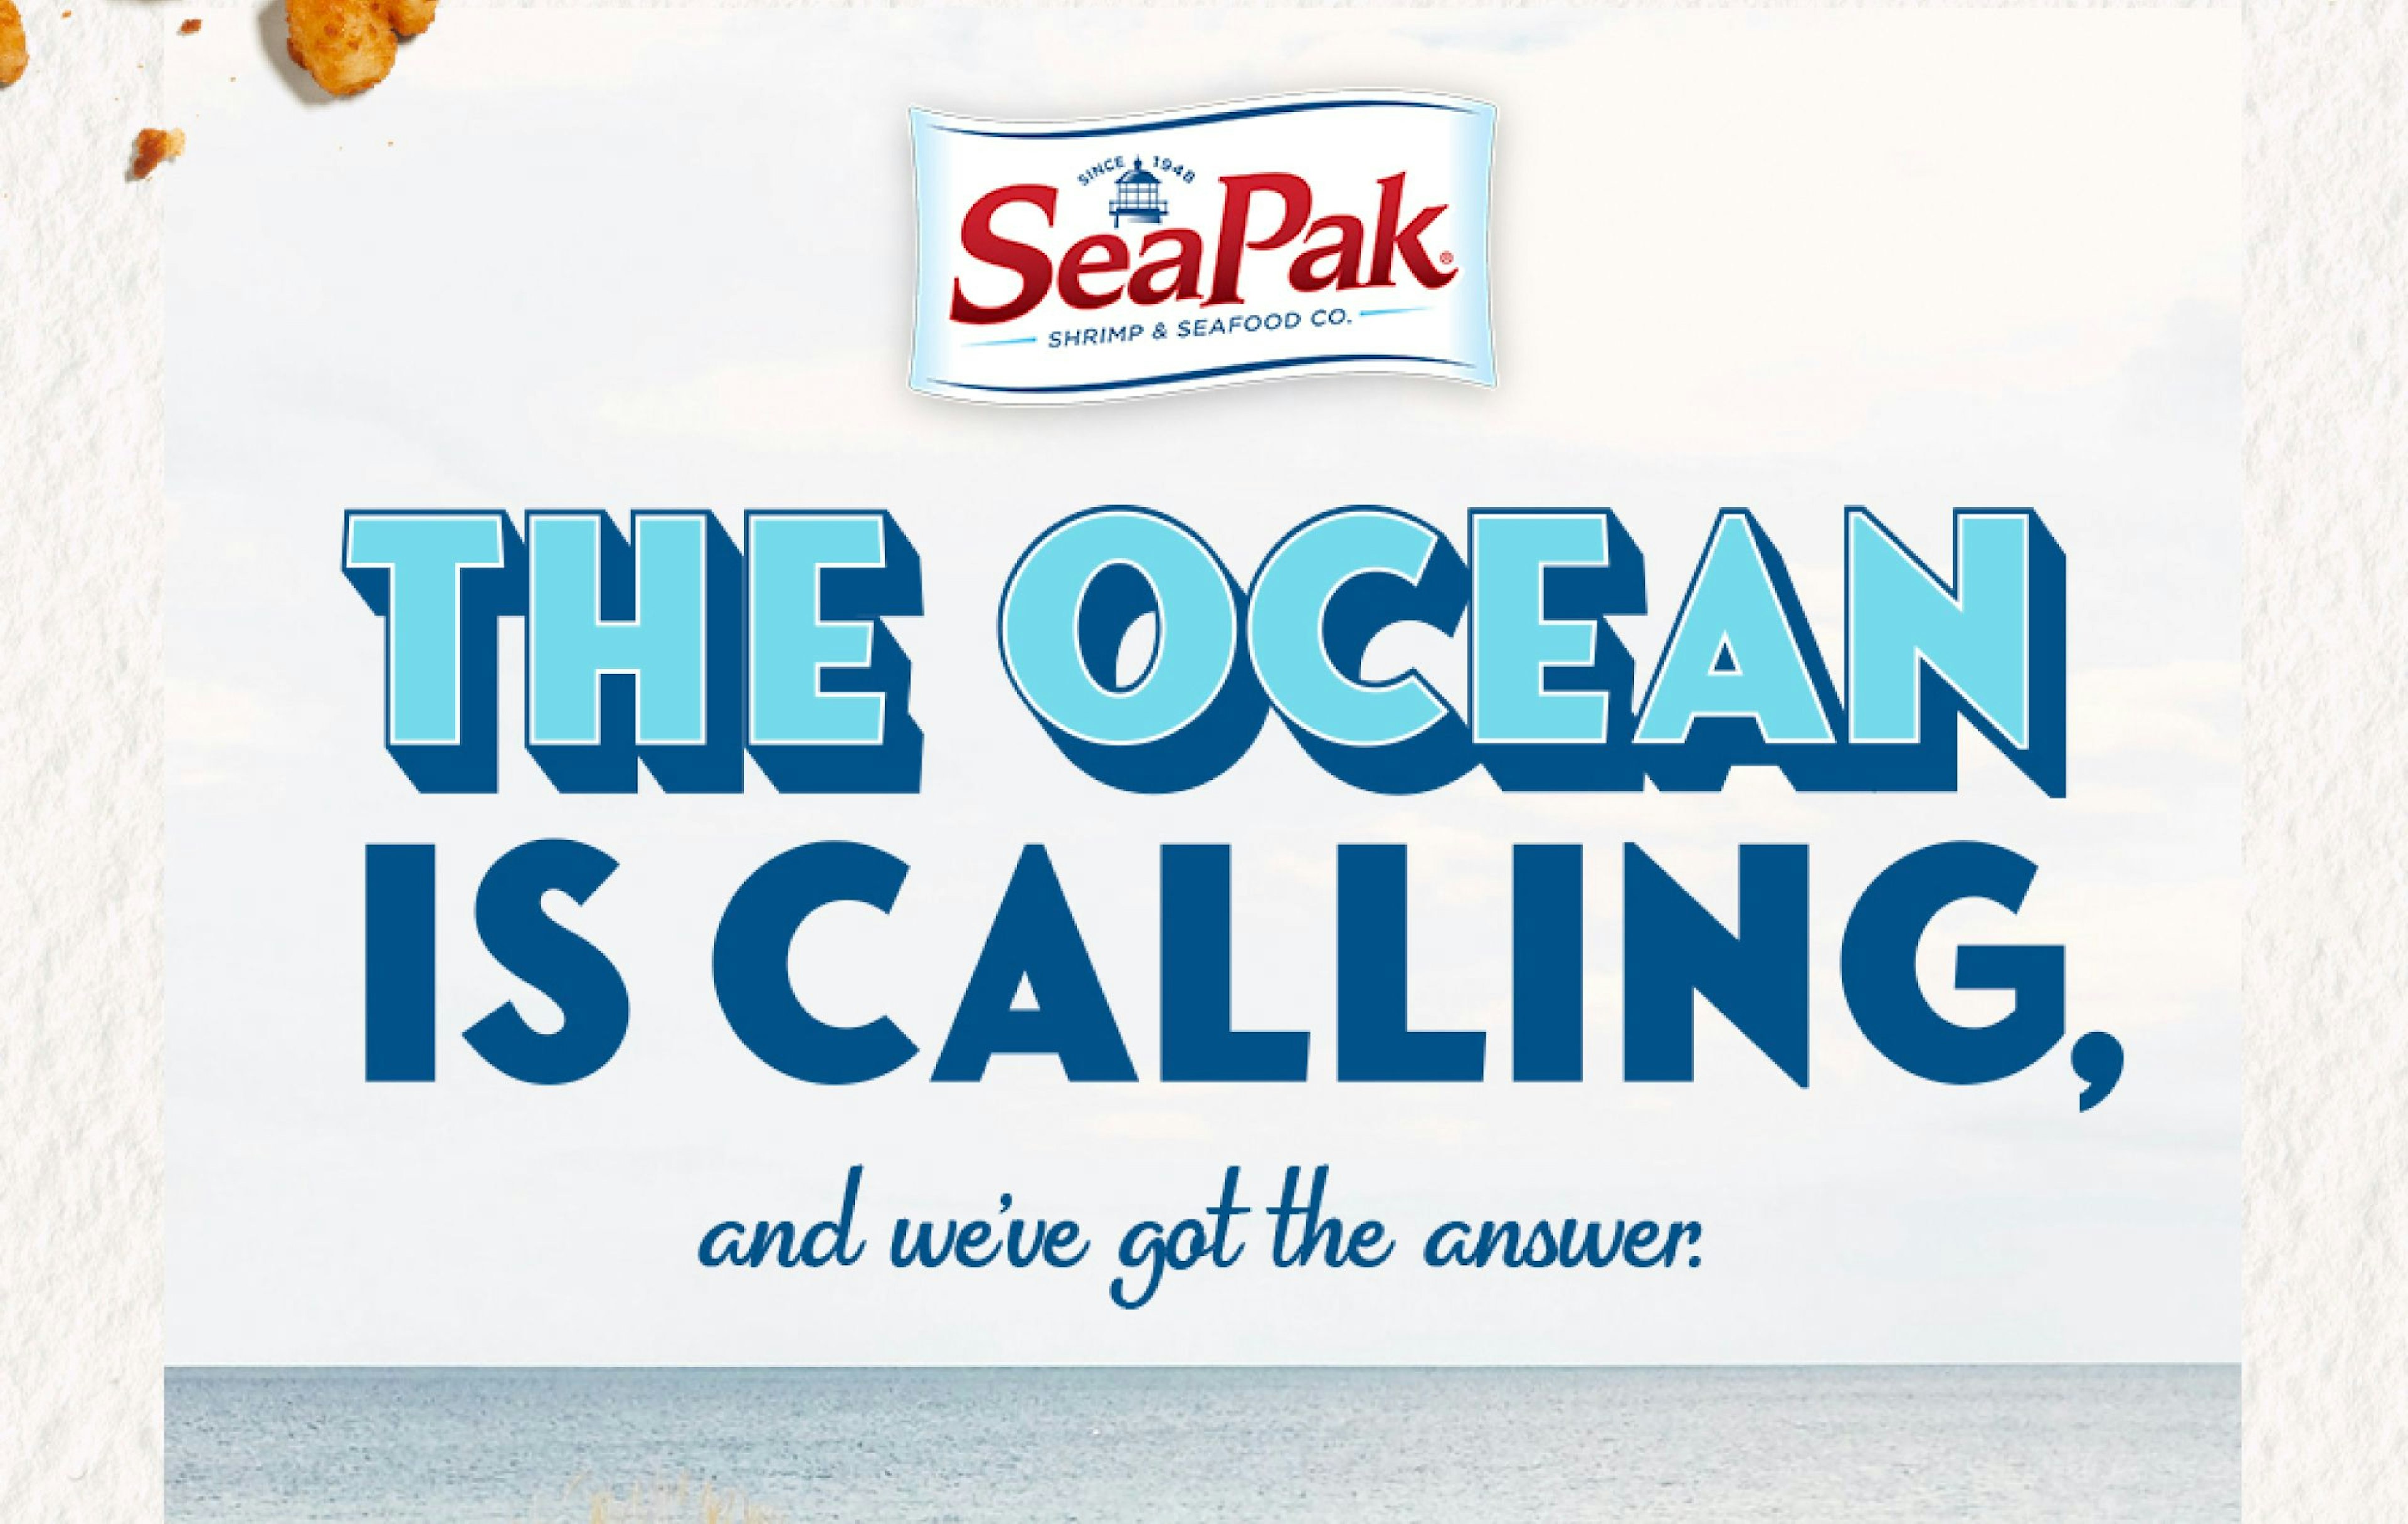 The Ocean is Calling, and we've got the answer.